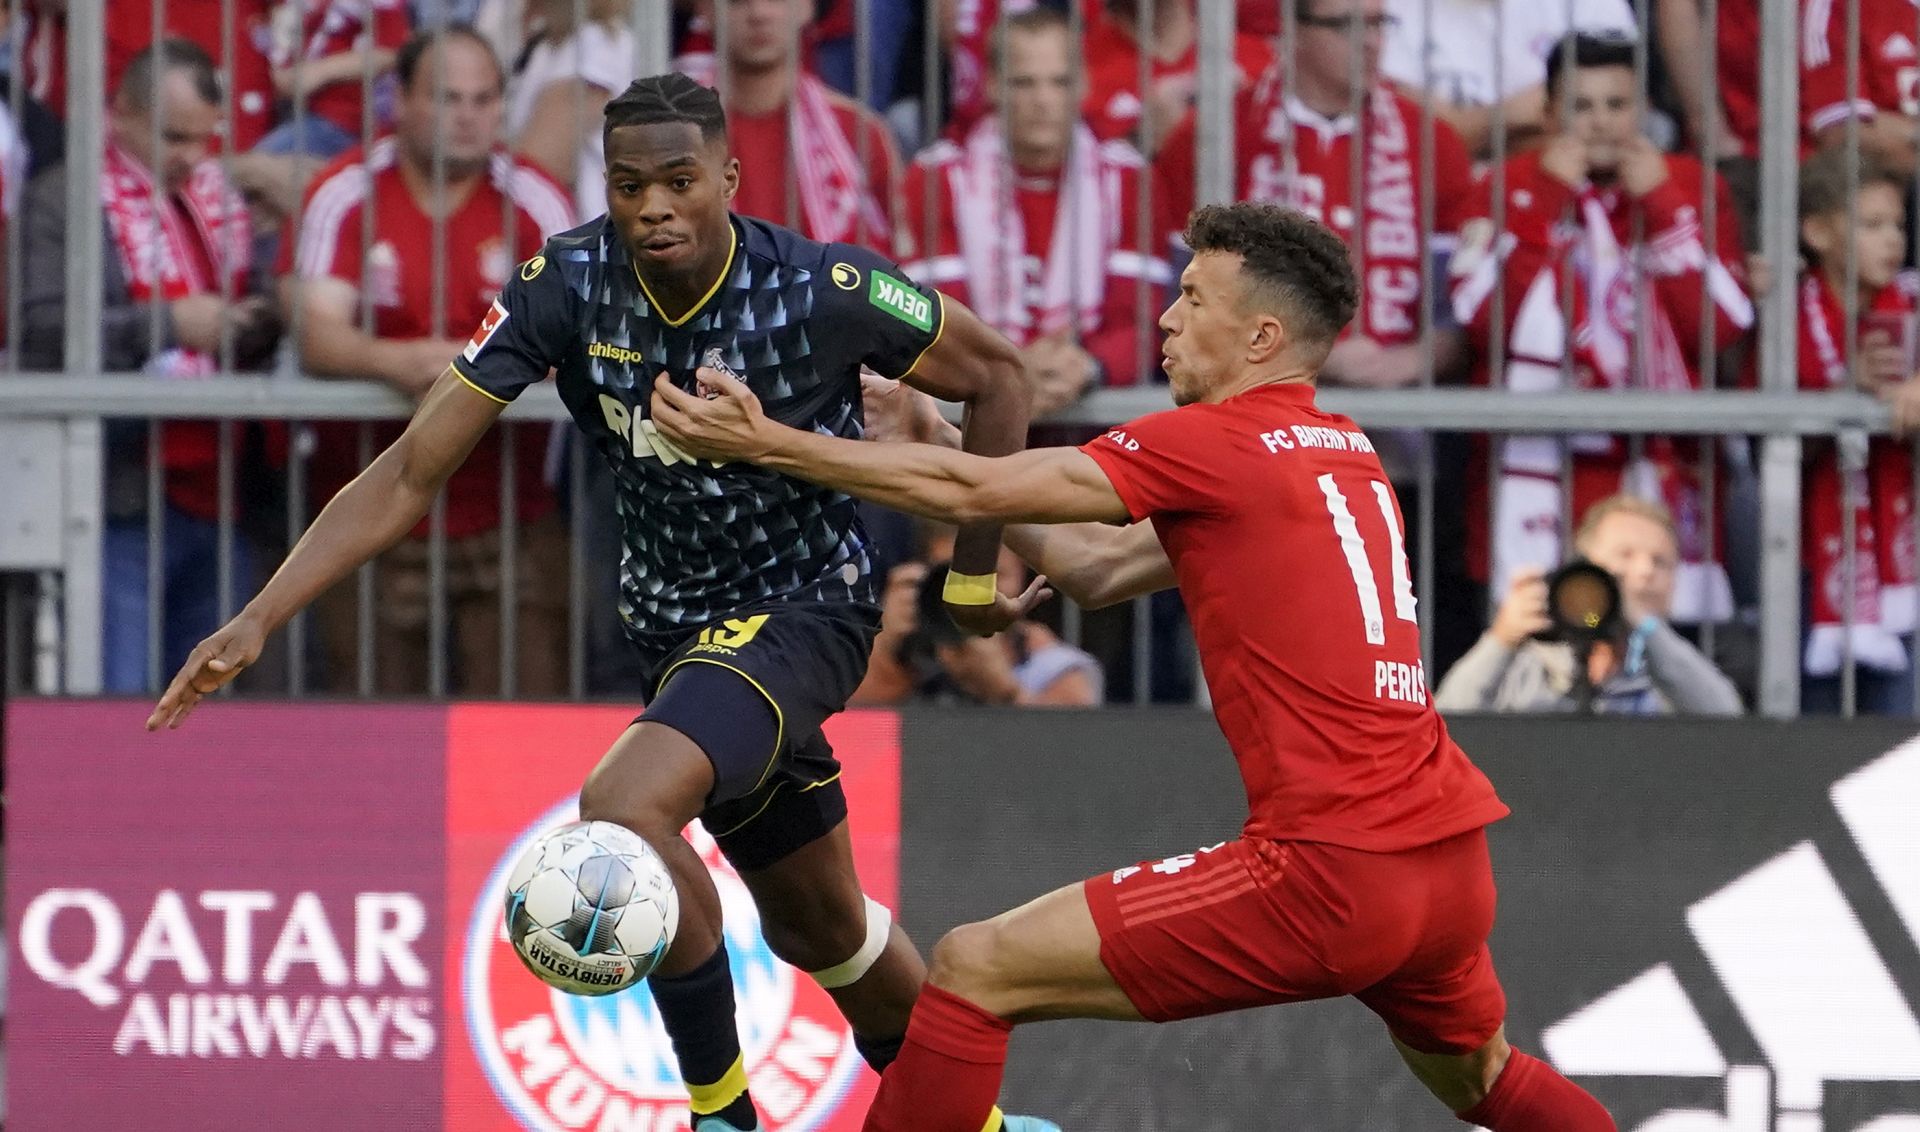 epa07859133 Bayern's Ivan Perisic (R) in action against Cologne's Kingsley Ehizibue (L) during the German Bundesliga soccer match between FC Bayern Munich and 1. FC Koeln, in Munich, Germany, 21 September 2019.  EPA/RONALD WITTEK CONDITIONS - ATTENTION: The DFL regulations prohibit any use of photographs as image sequences and/or quasi-video.